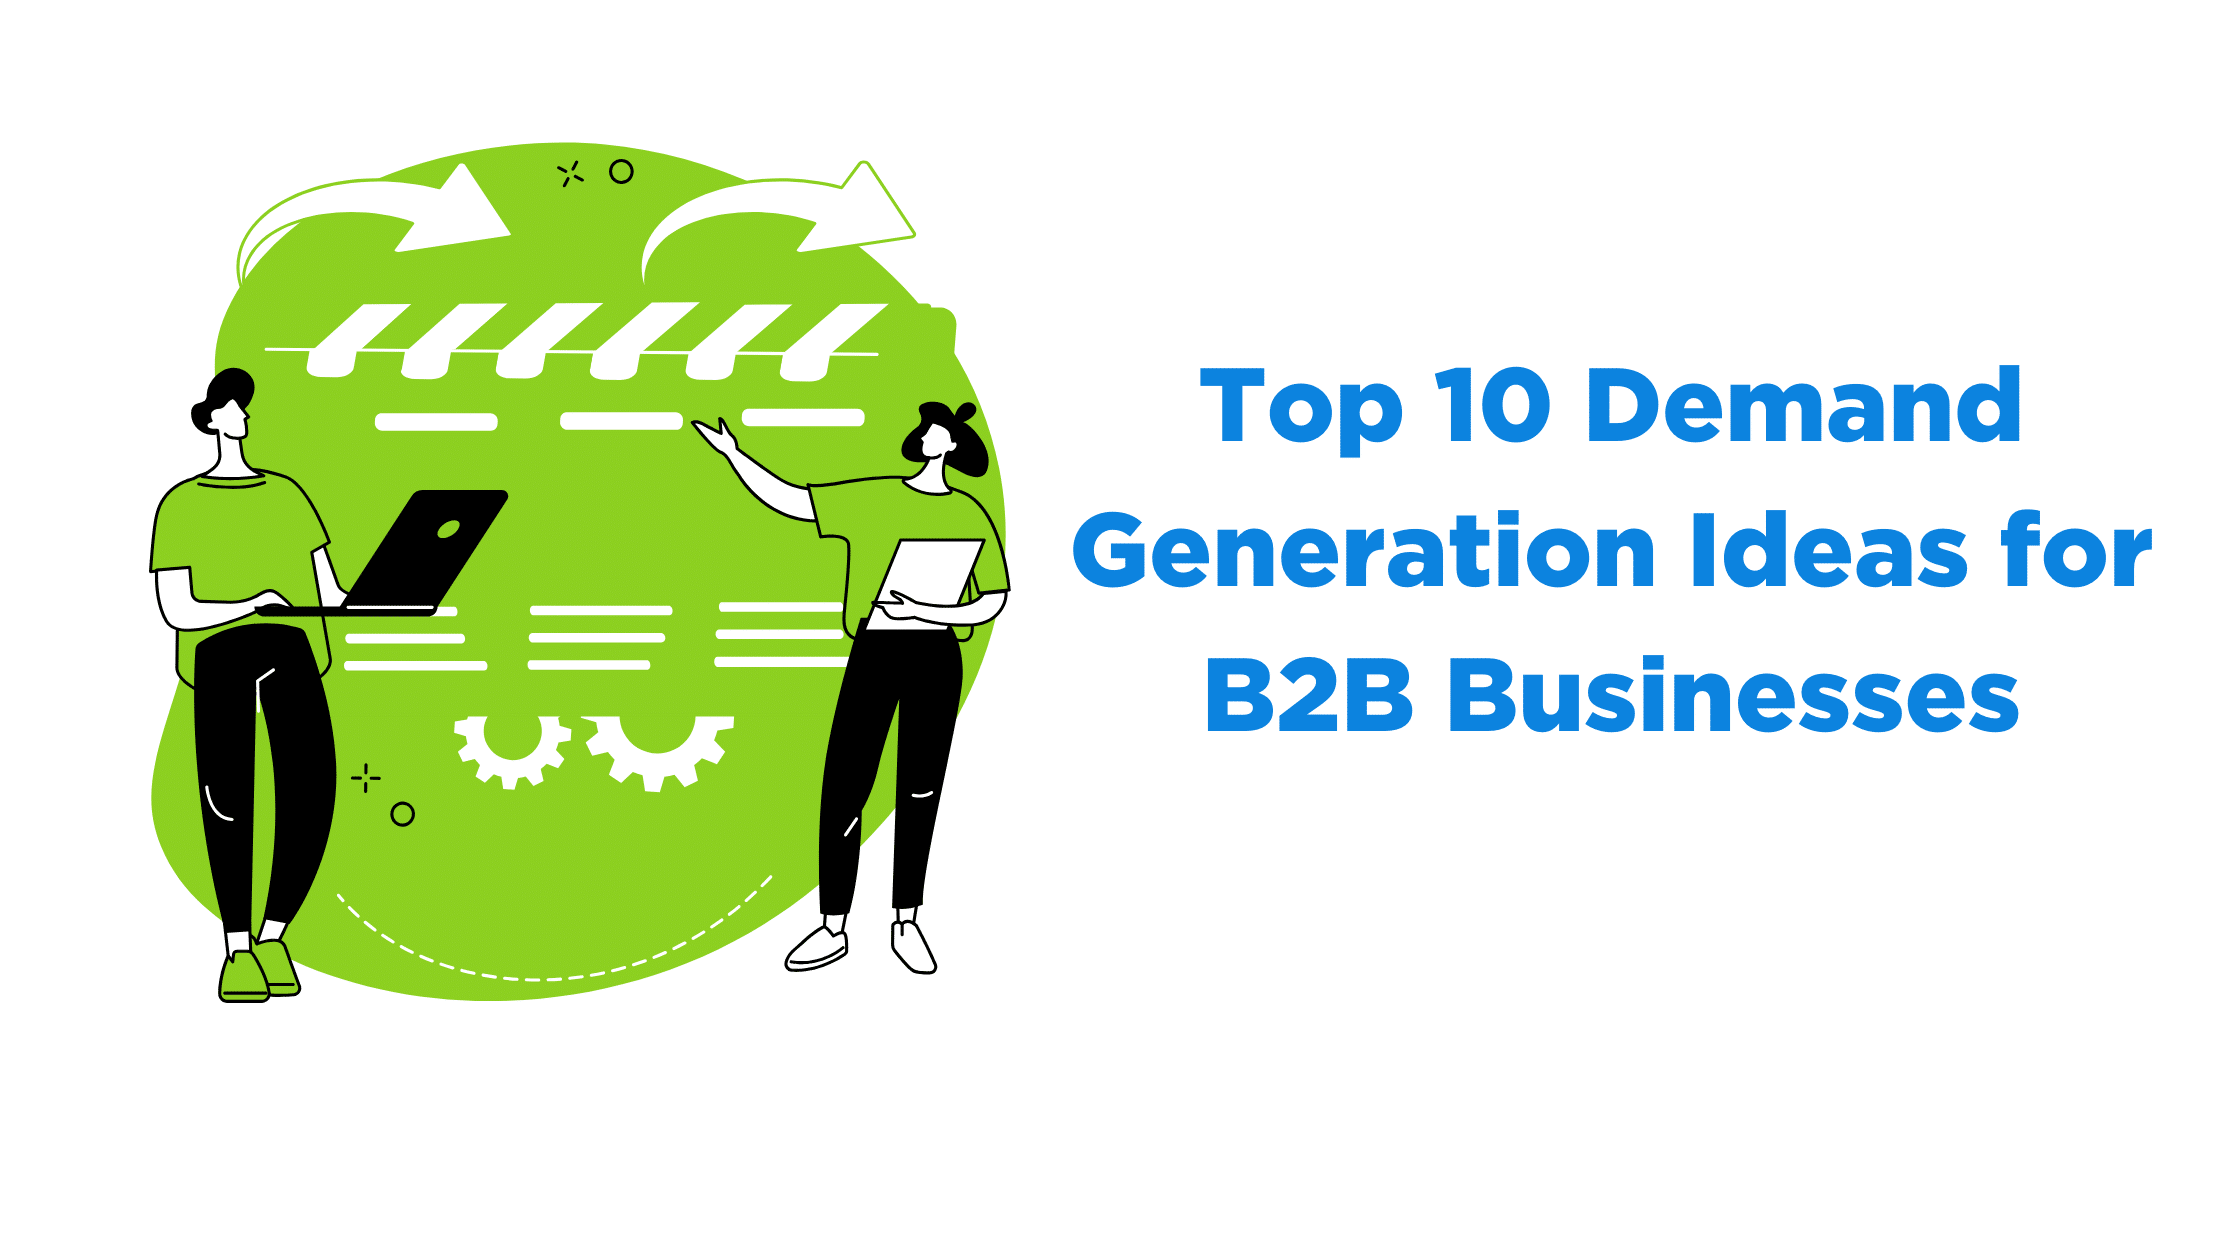 Top 10 Demand Generation Ideas For B2B Businesses